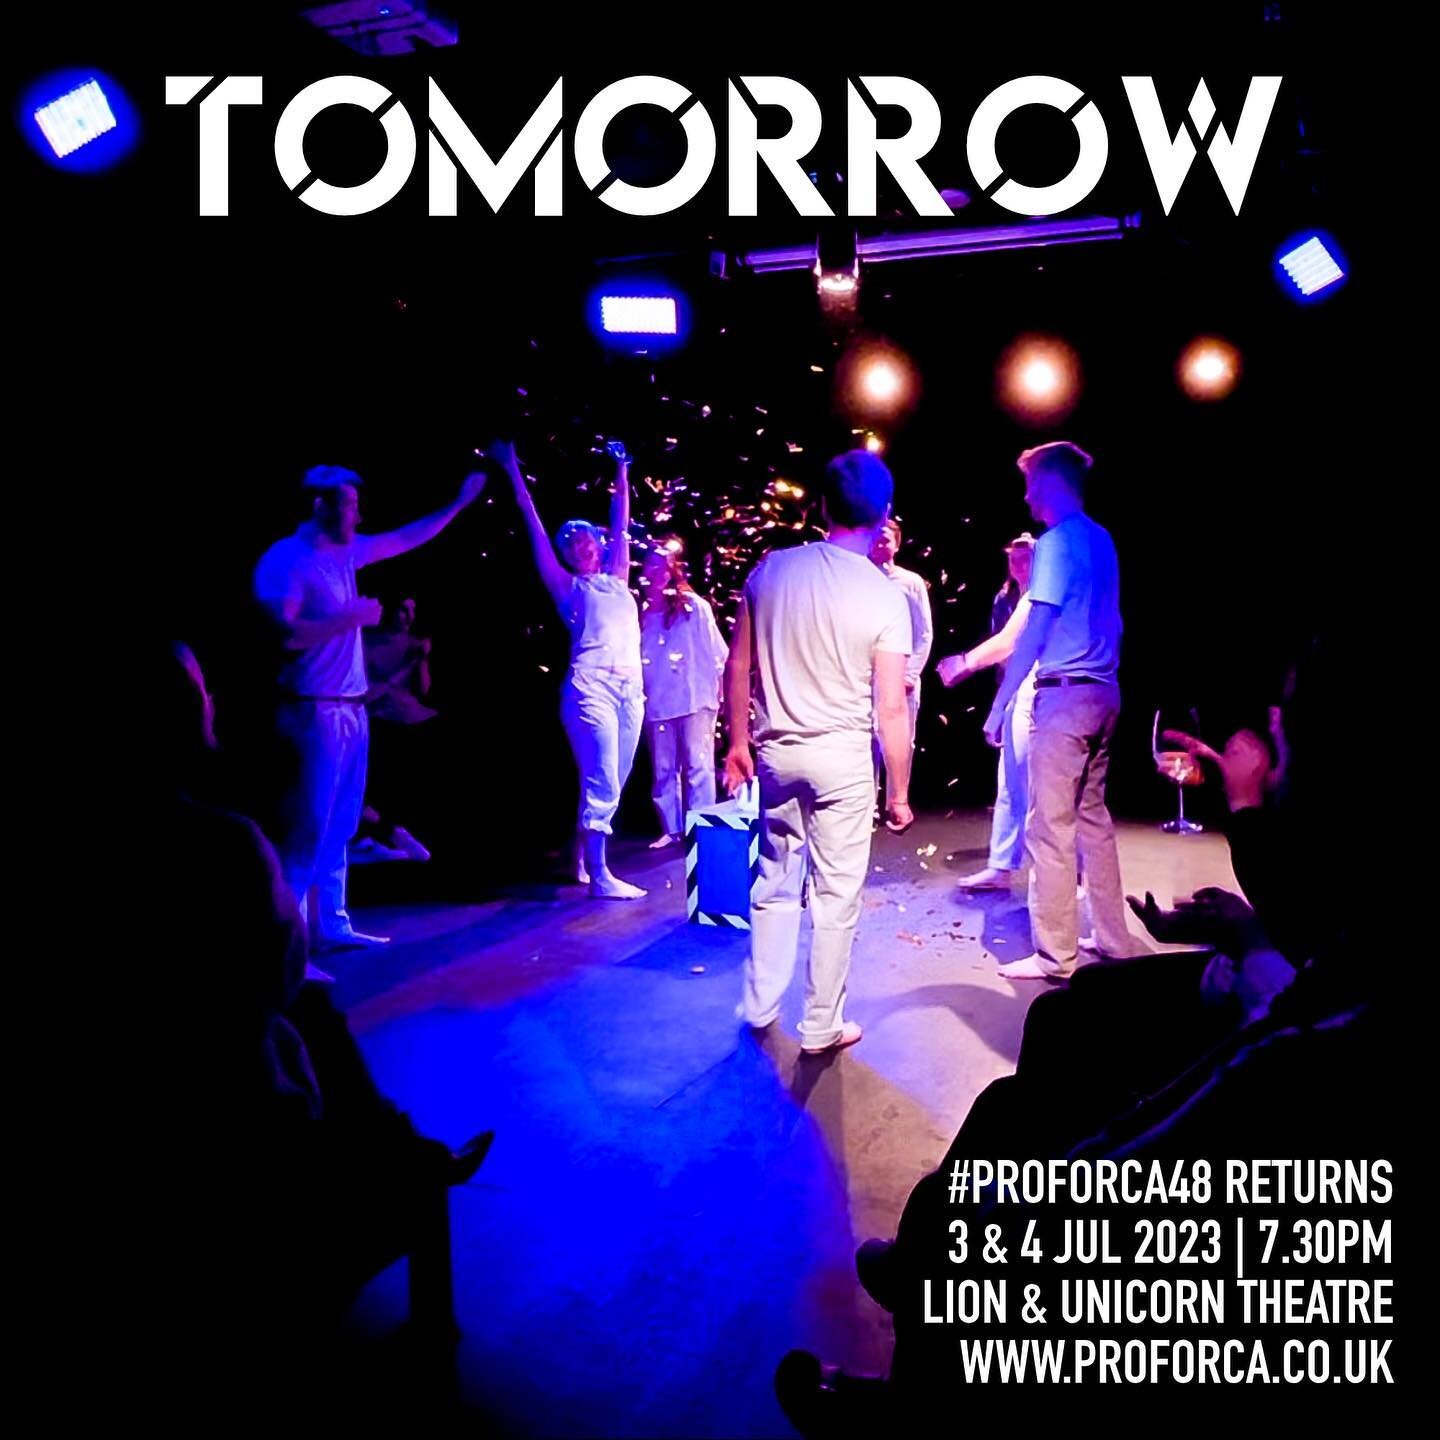 TOMORROW: A search for the most important person in the world leads to a bonkers quest through time and space. Join us for the final 2 performances of #Proforca48 when it returns @landutheatre tomorrow night at 7.30pm! 🔮
_
_
_
_
#theatre #stage #lon